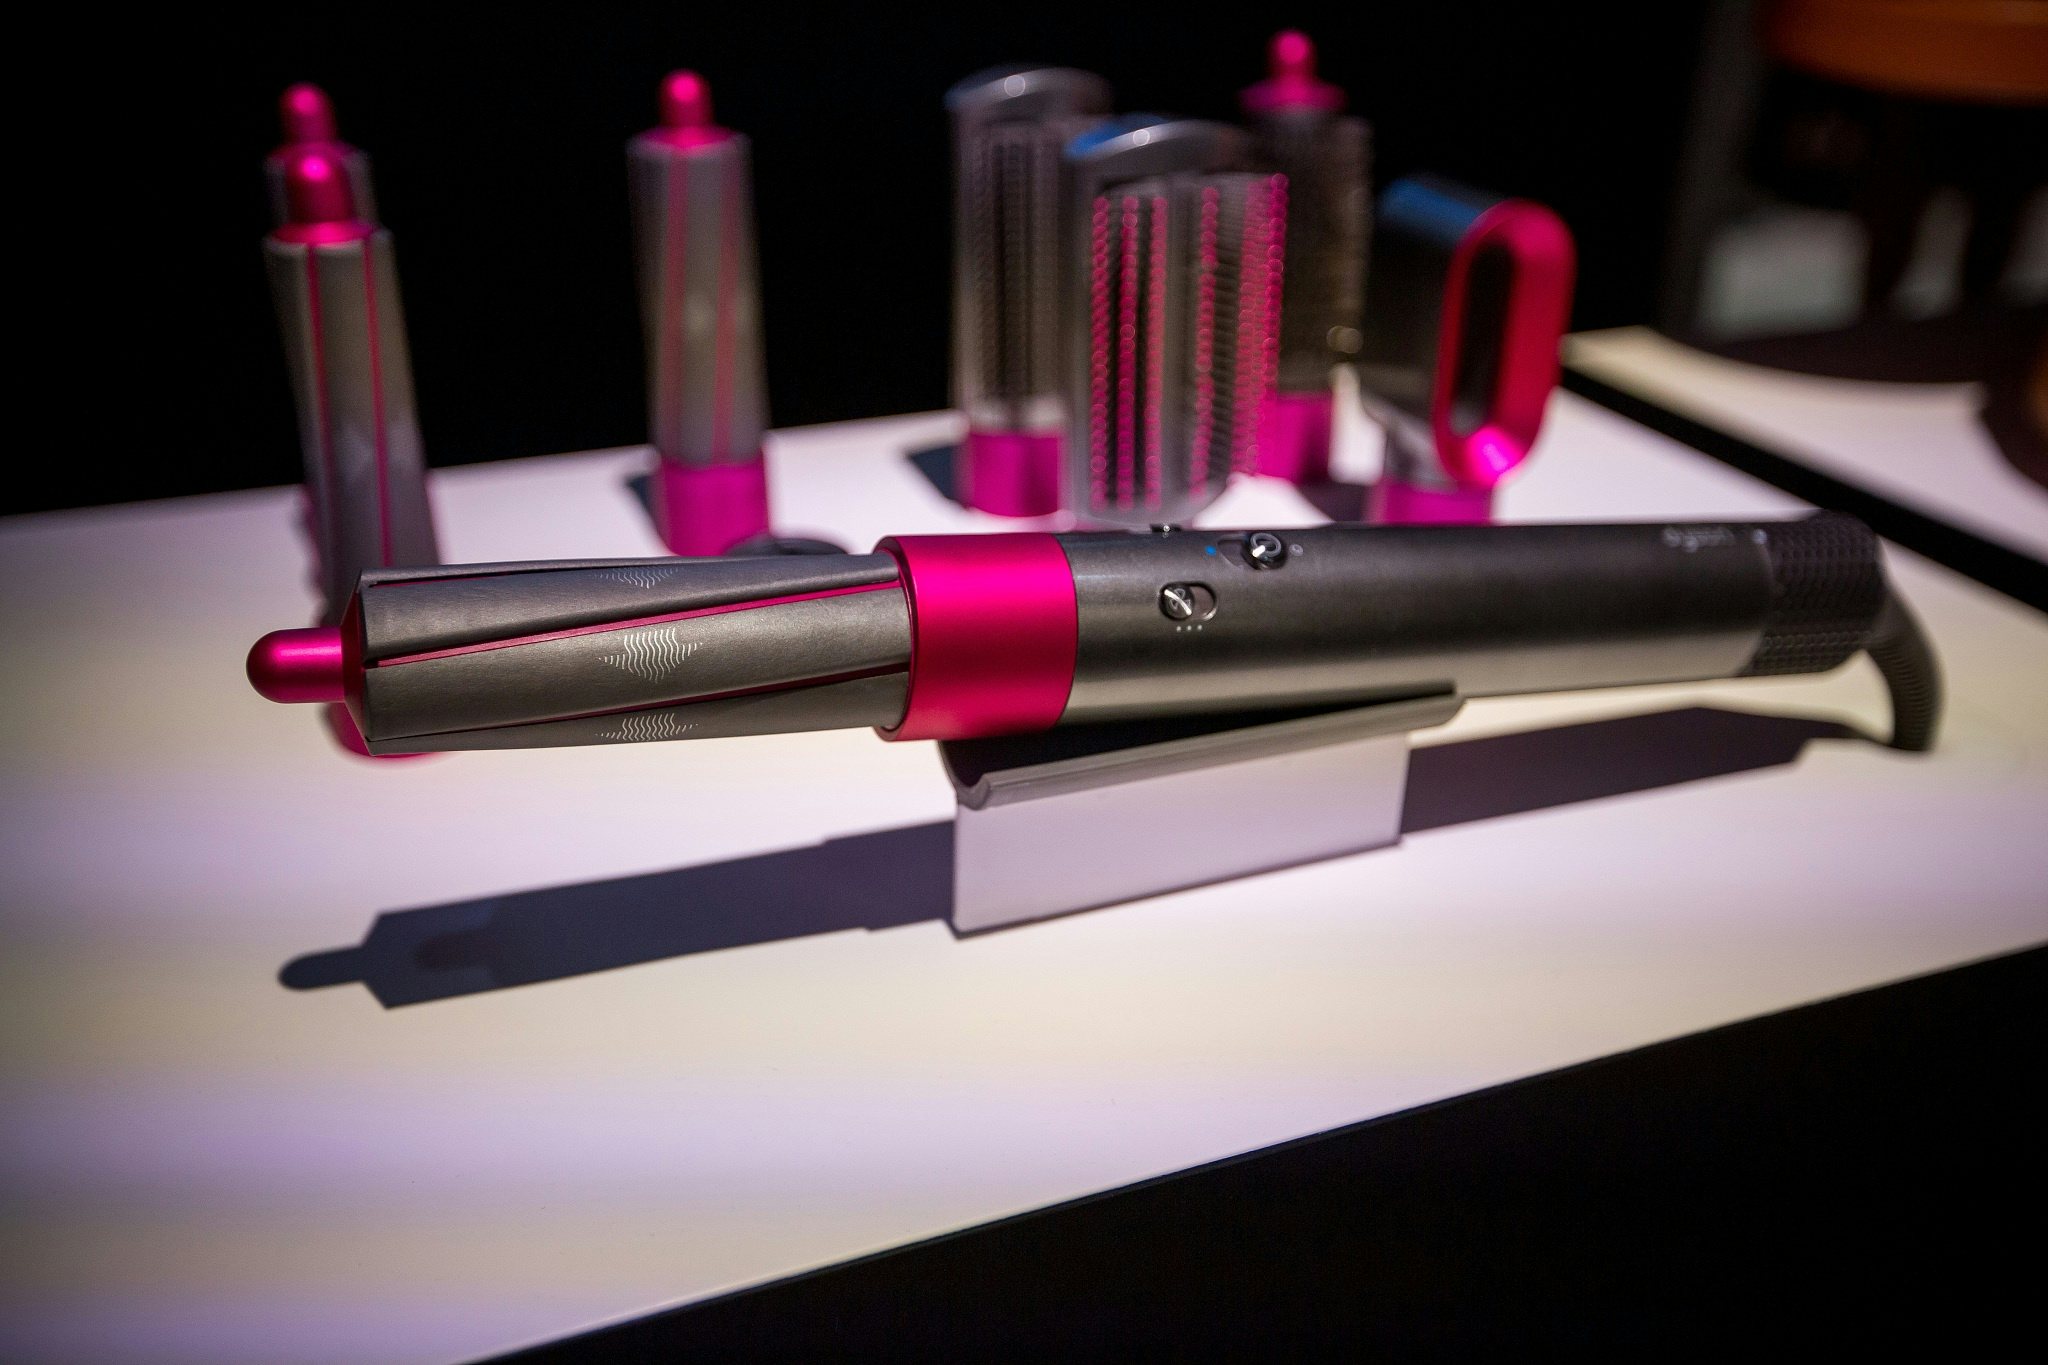 An influencer endorsement/video of this new $550 (RMB 3,804) Dyson curling iron set had 11 million page views in 24 hours. Photo: VCG